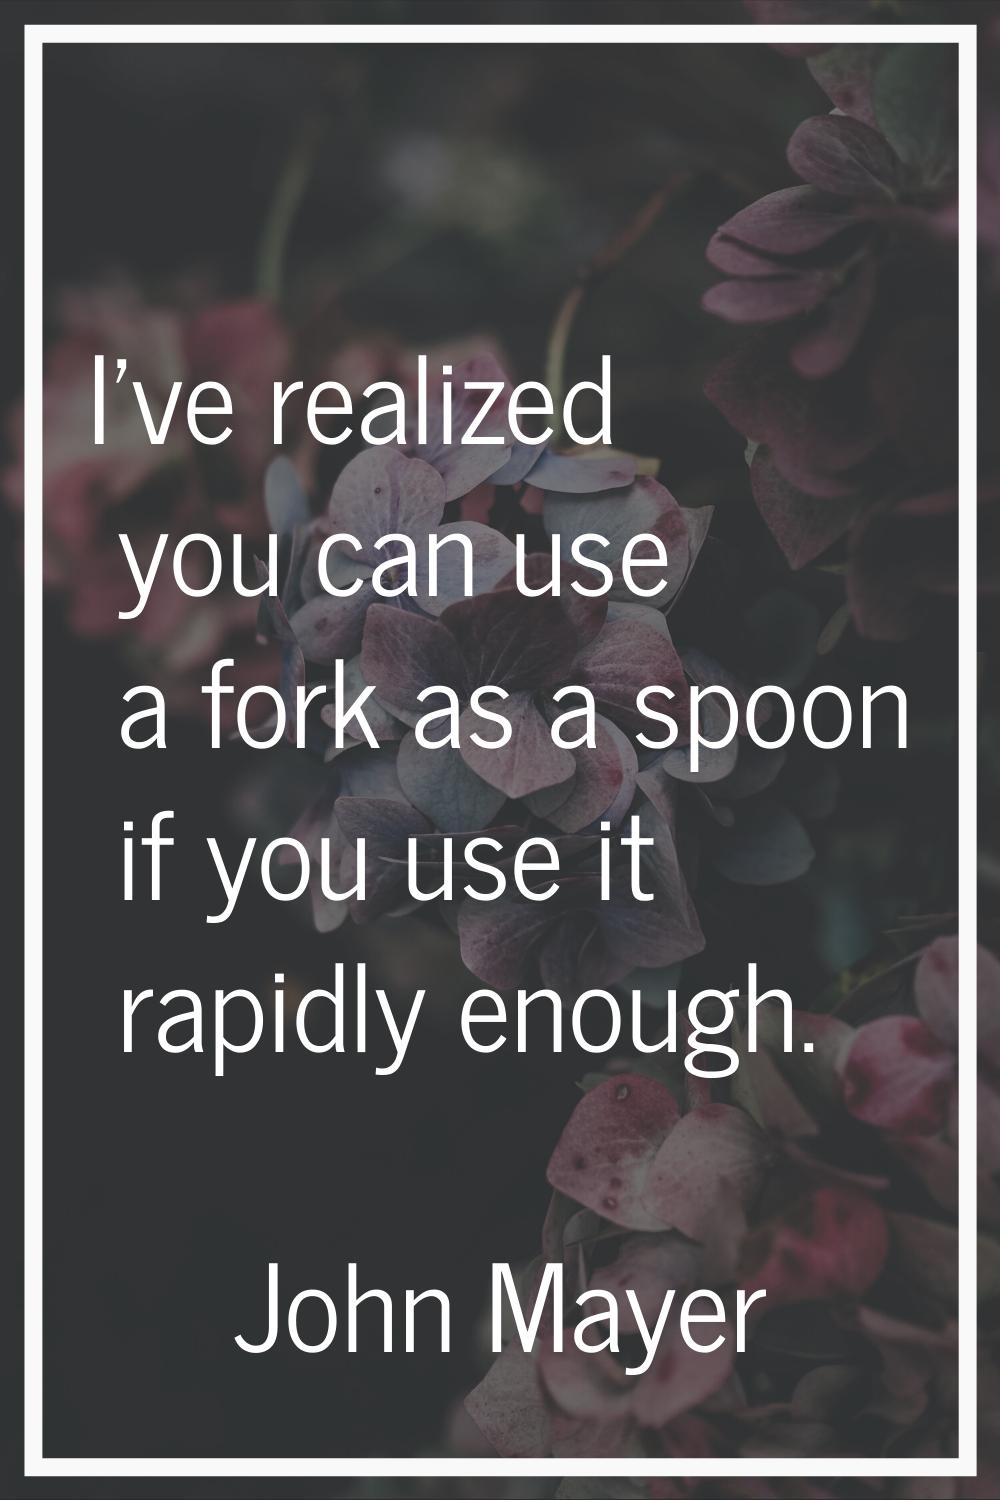 I've realized you can use a fork as a spoon if you use it rapidly enough.